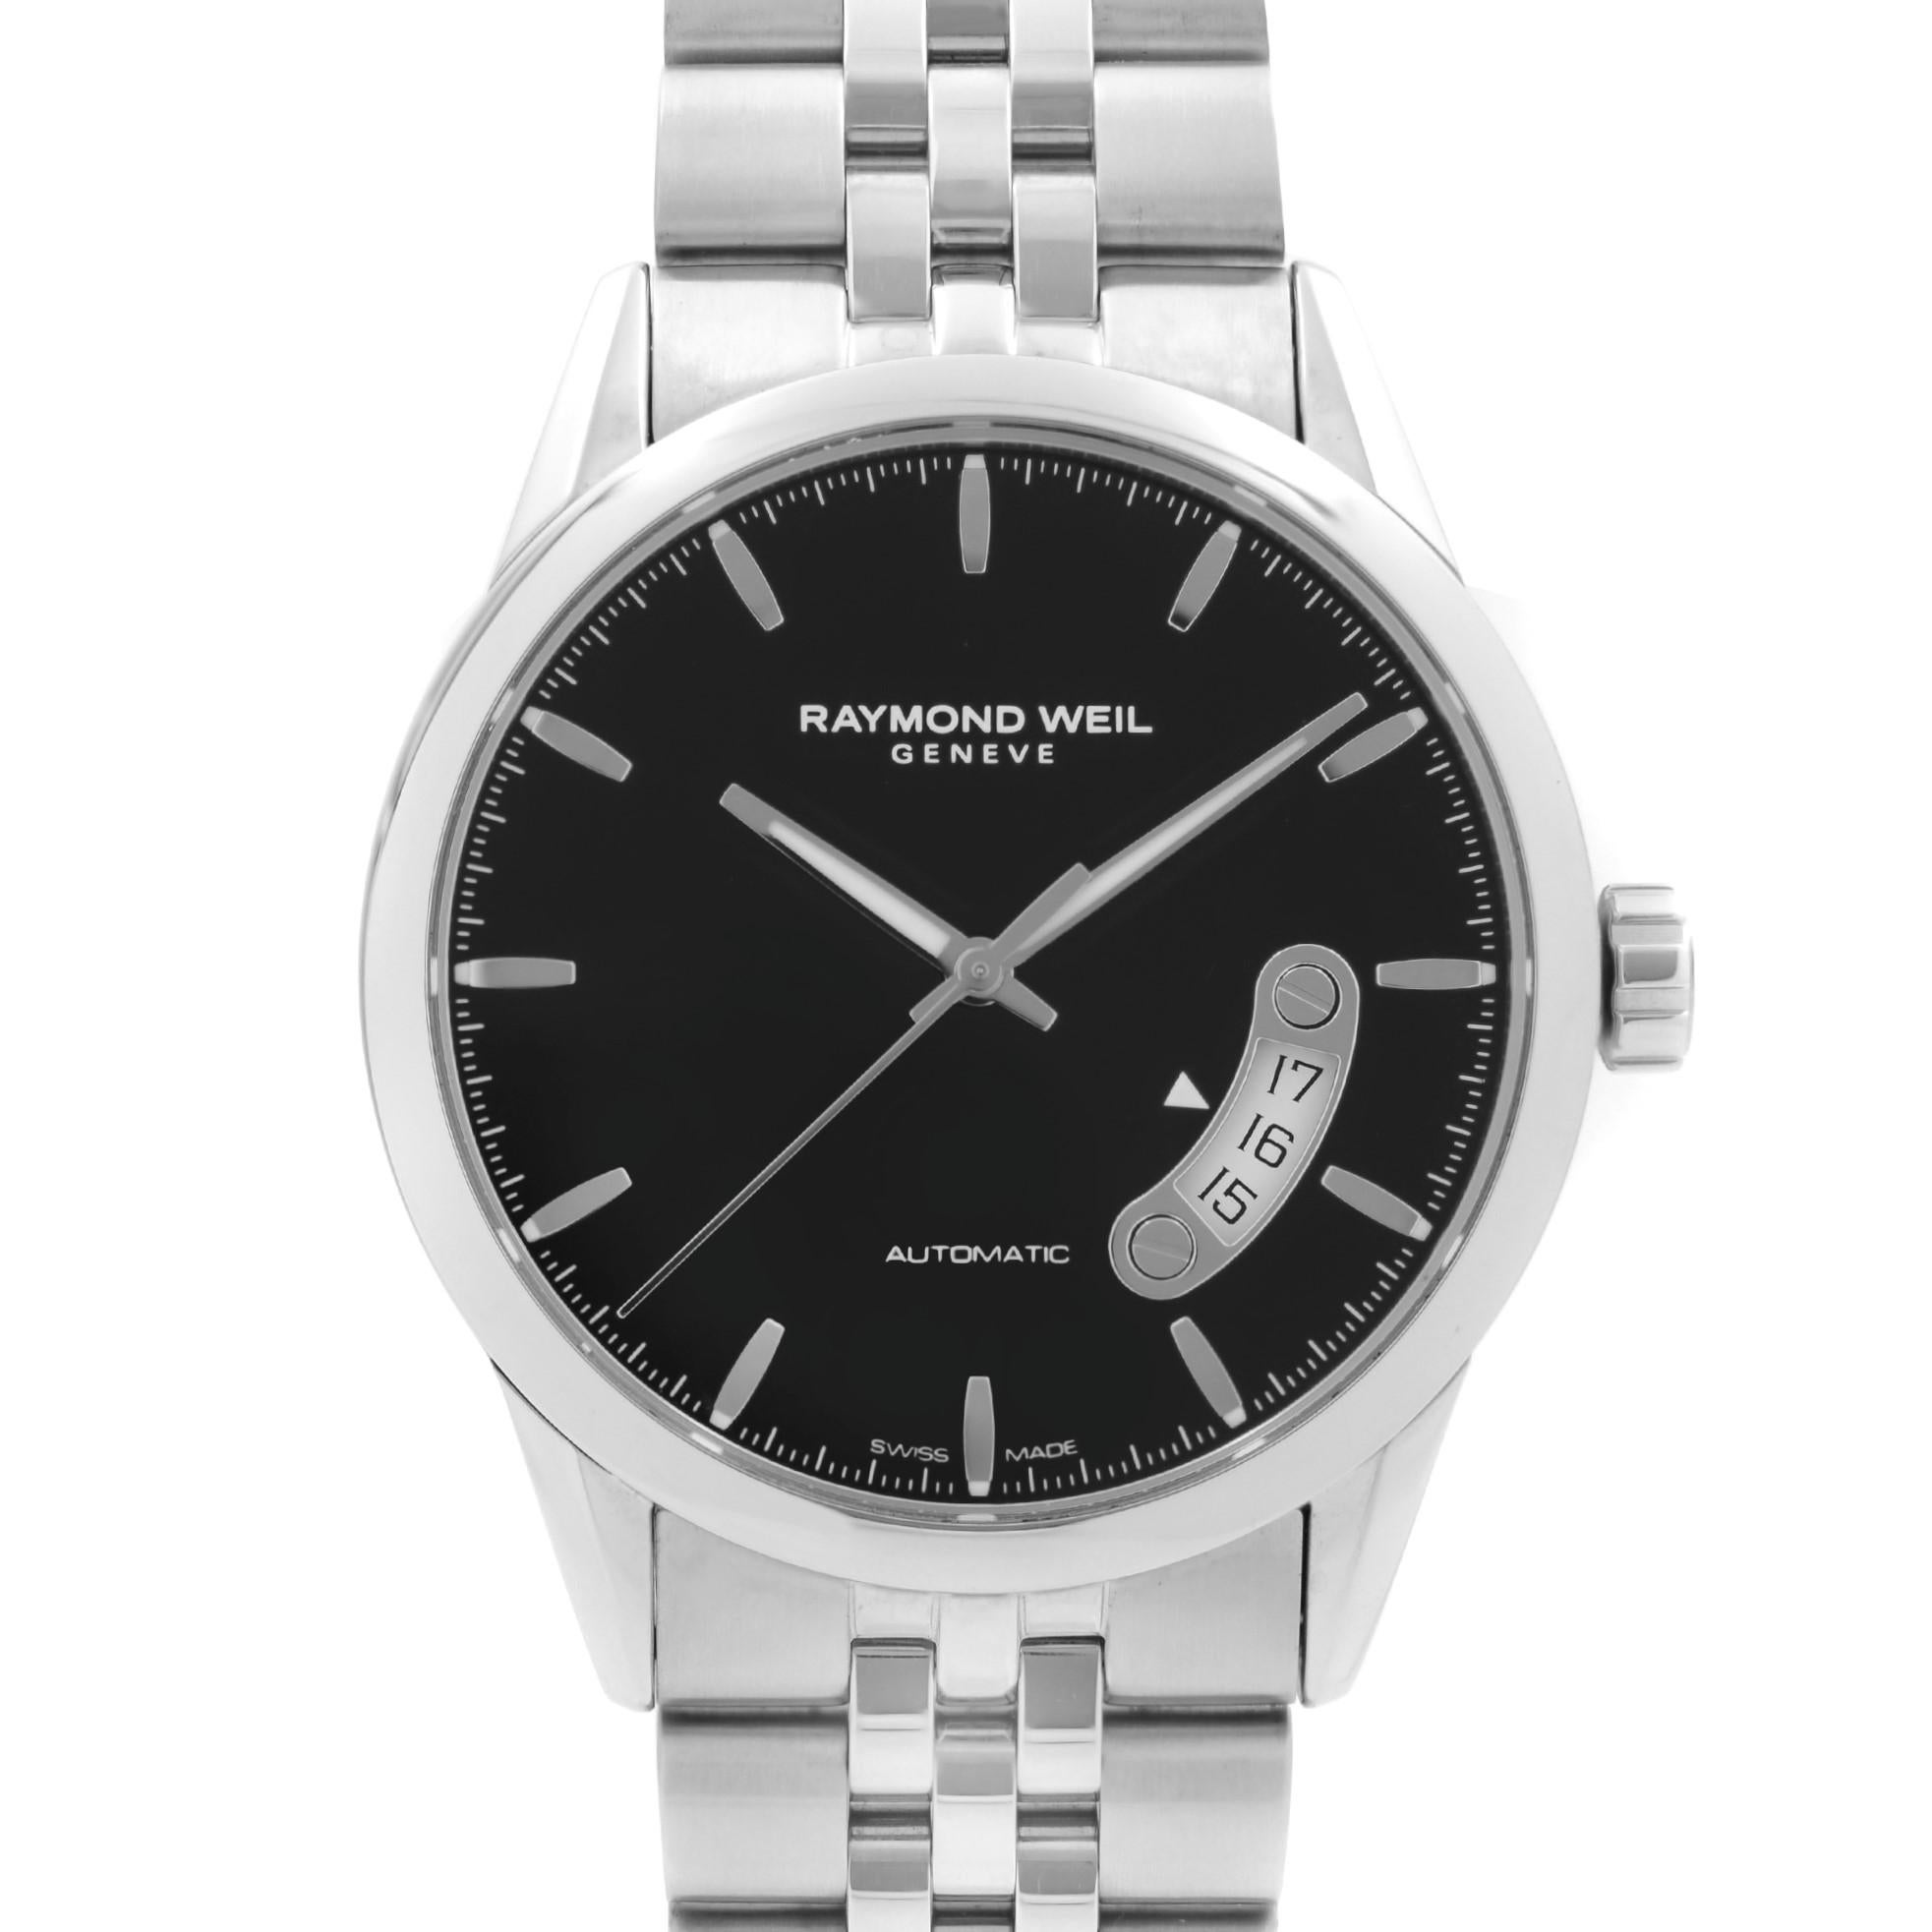 Display Model Raymond Weil Freelancer 38mm Steel Black Dial Automatic Men's Watch 2770-ST-20011. This Beautiful Timepiece Features: Stainless Steel Case and Bracelet, Fixed Stainless Steel Bezel, Black Dial with Luminous Silver-Tone Hands, And Index